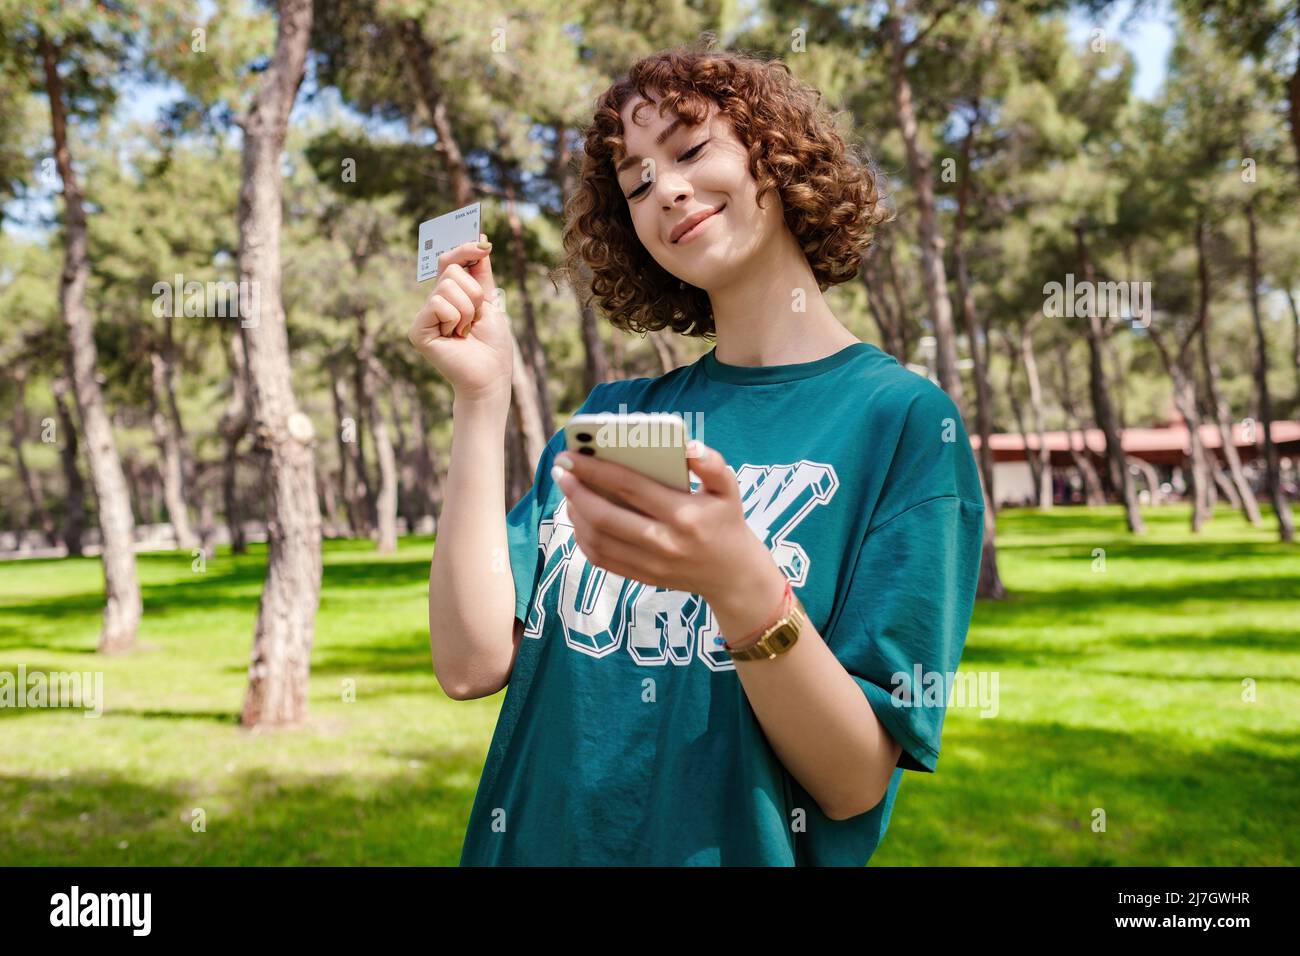 Happy young redhead woman in green tee showing plastic credit card while using mobile phone. Outdoor online or mobile shopping concepts. Stock Photo